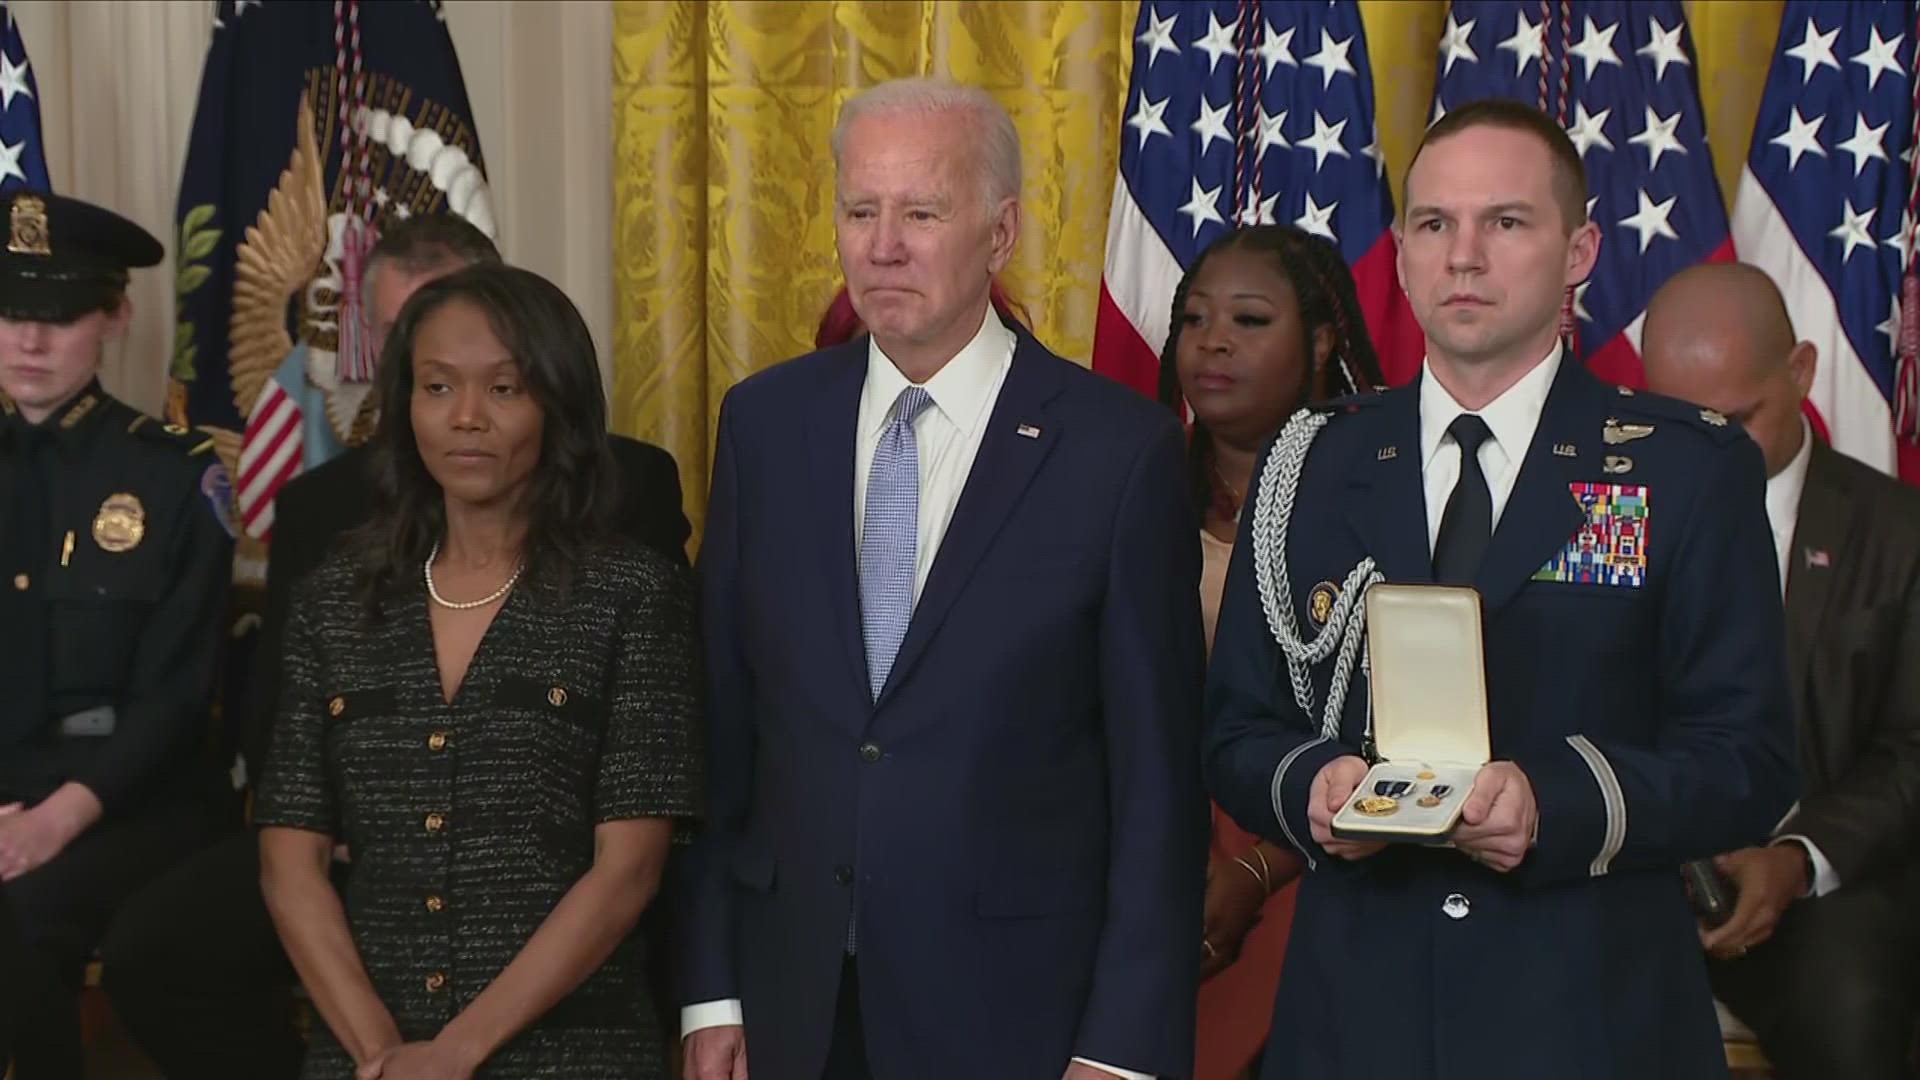 Among those honored by Biden with the nation's second highest civilian award were seven members of law enforcement, as well as election workers and officials.